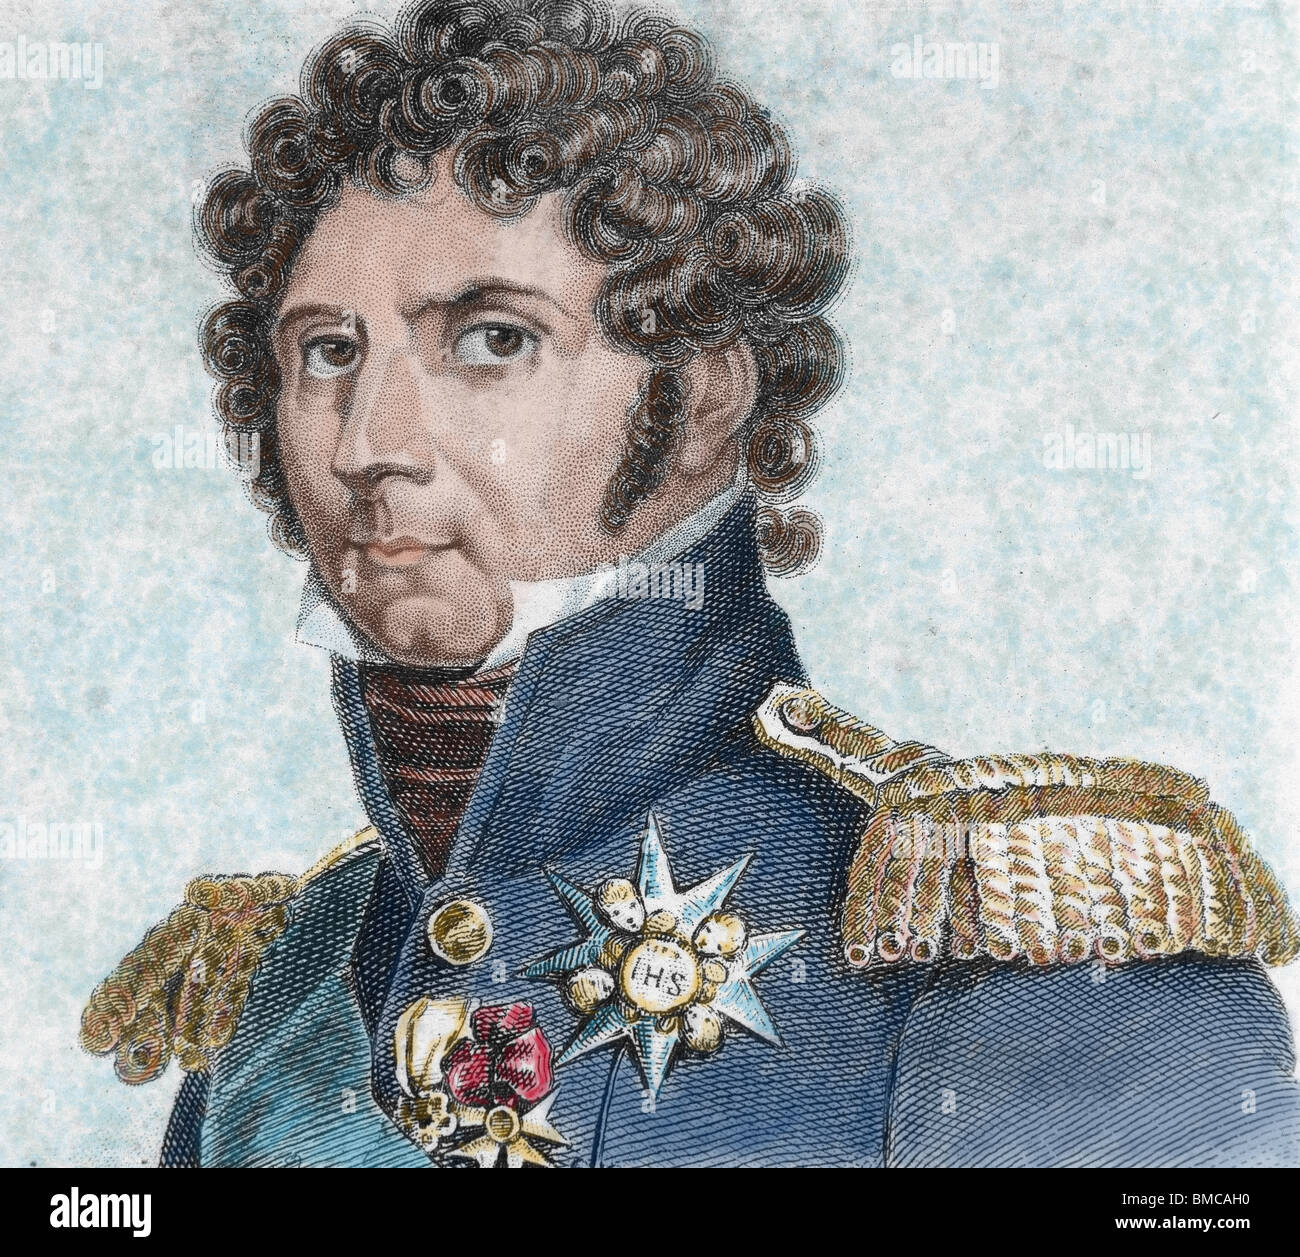 Charles XIV John of Sweden (1764-1844). French soldier named Jean Baptiste Bernadotte, King of Sweden and Norway (1818-1844). Stock Photo